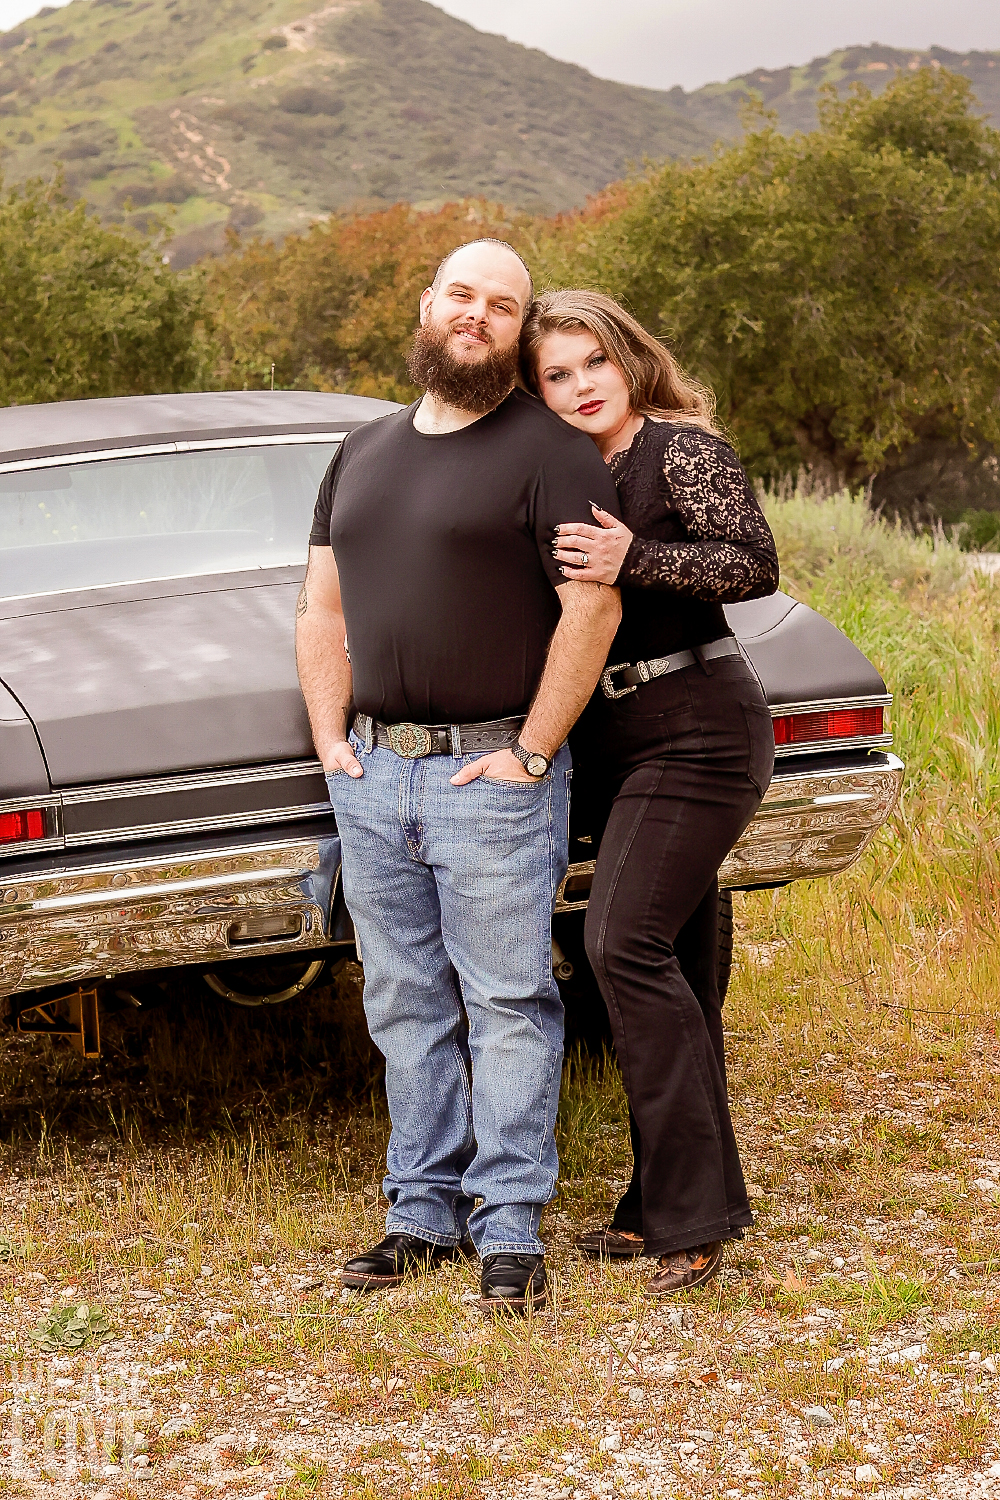 witchy_engagement_photoshoot_los_angeles_11